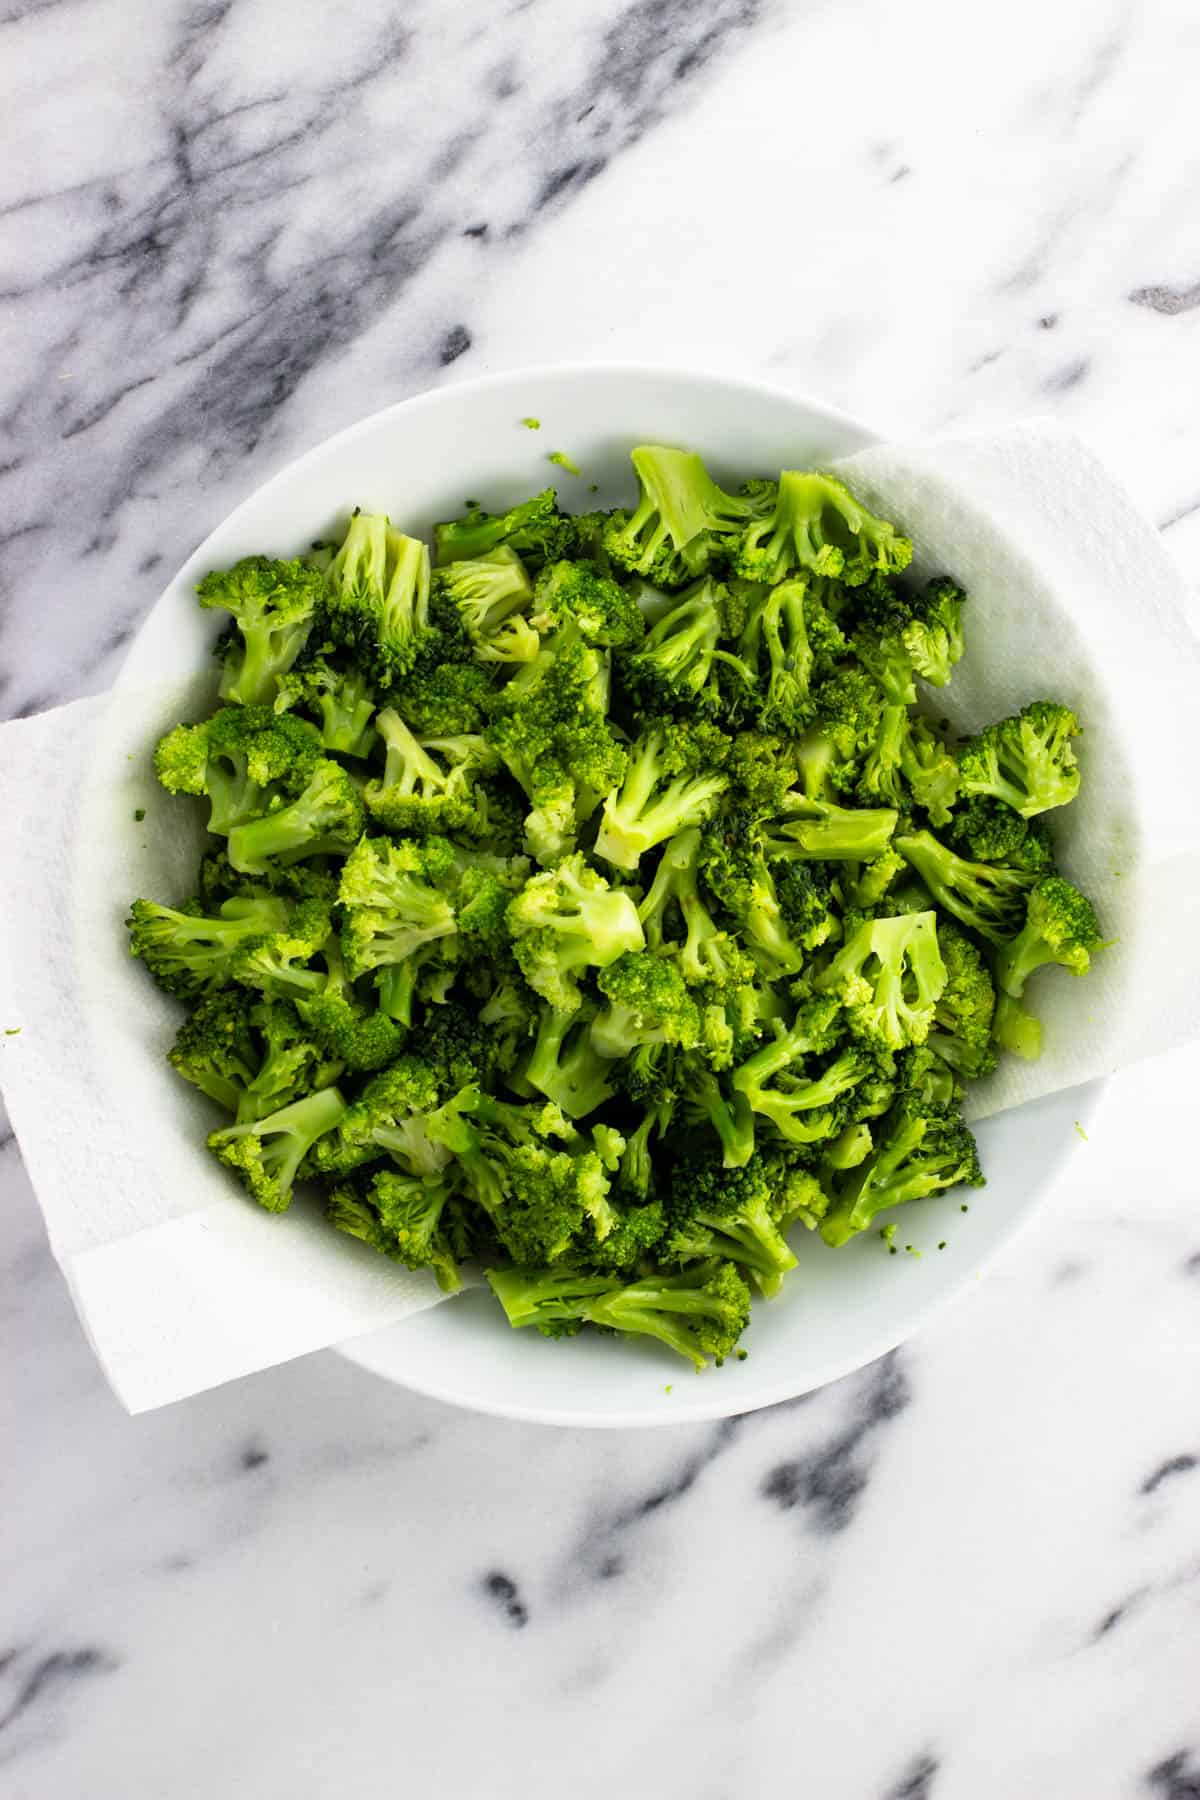 Steamed broccoli florets in a paper towel-lined shallow bowl.